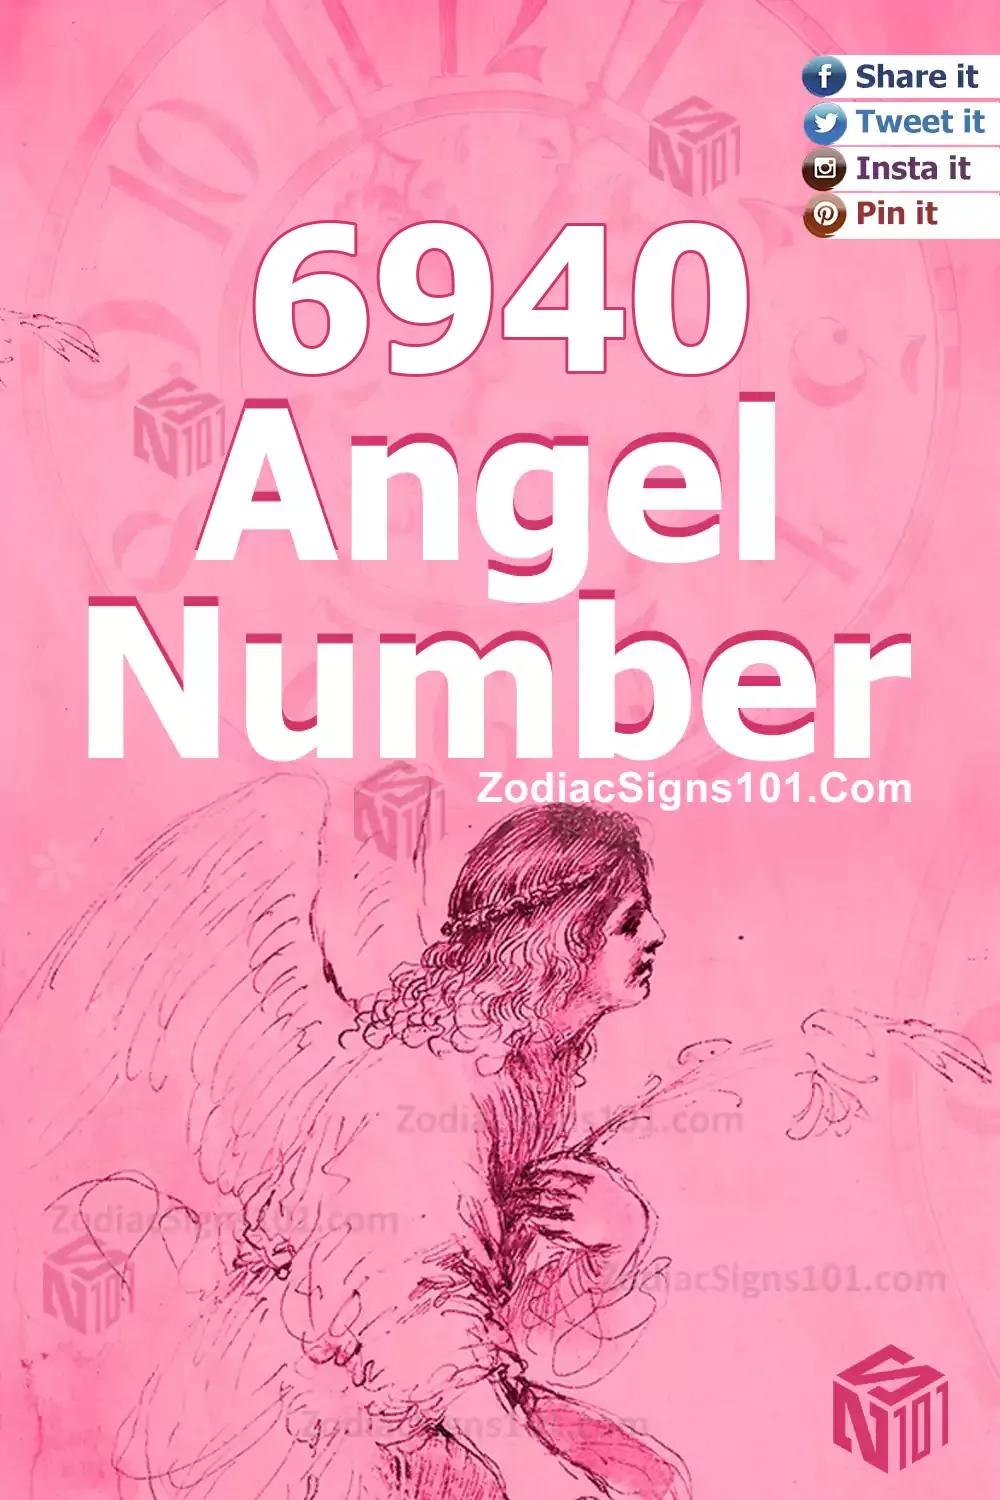 6940 Angel Number Meaning